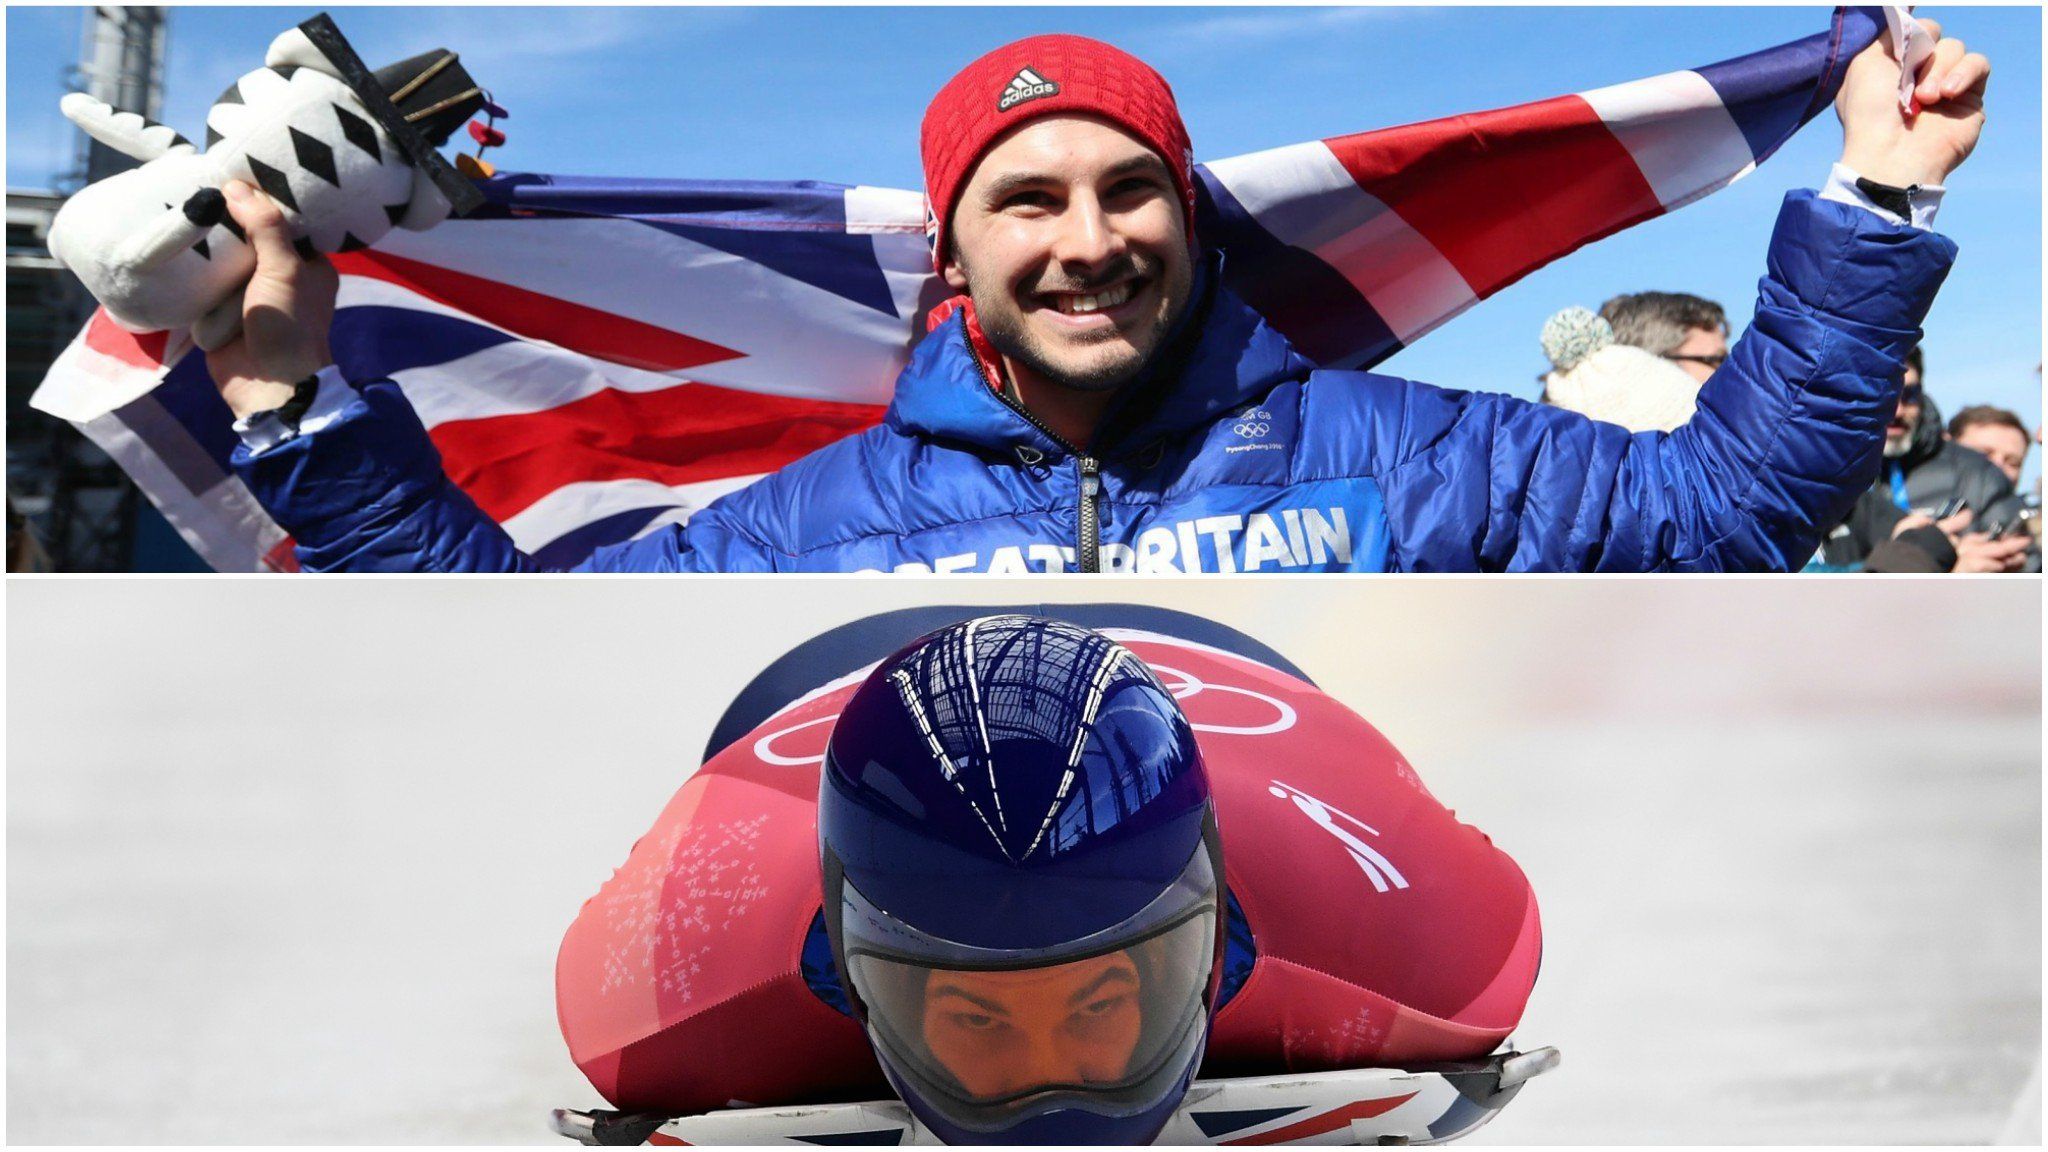 Winter Olympics Billy Morgan Wins Great Britains Record Fifth Medal Bbc Newsround 